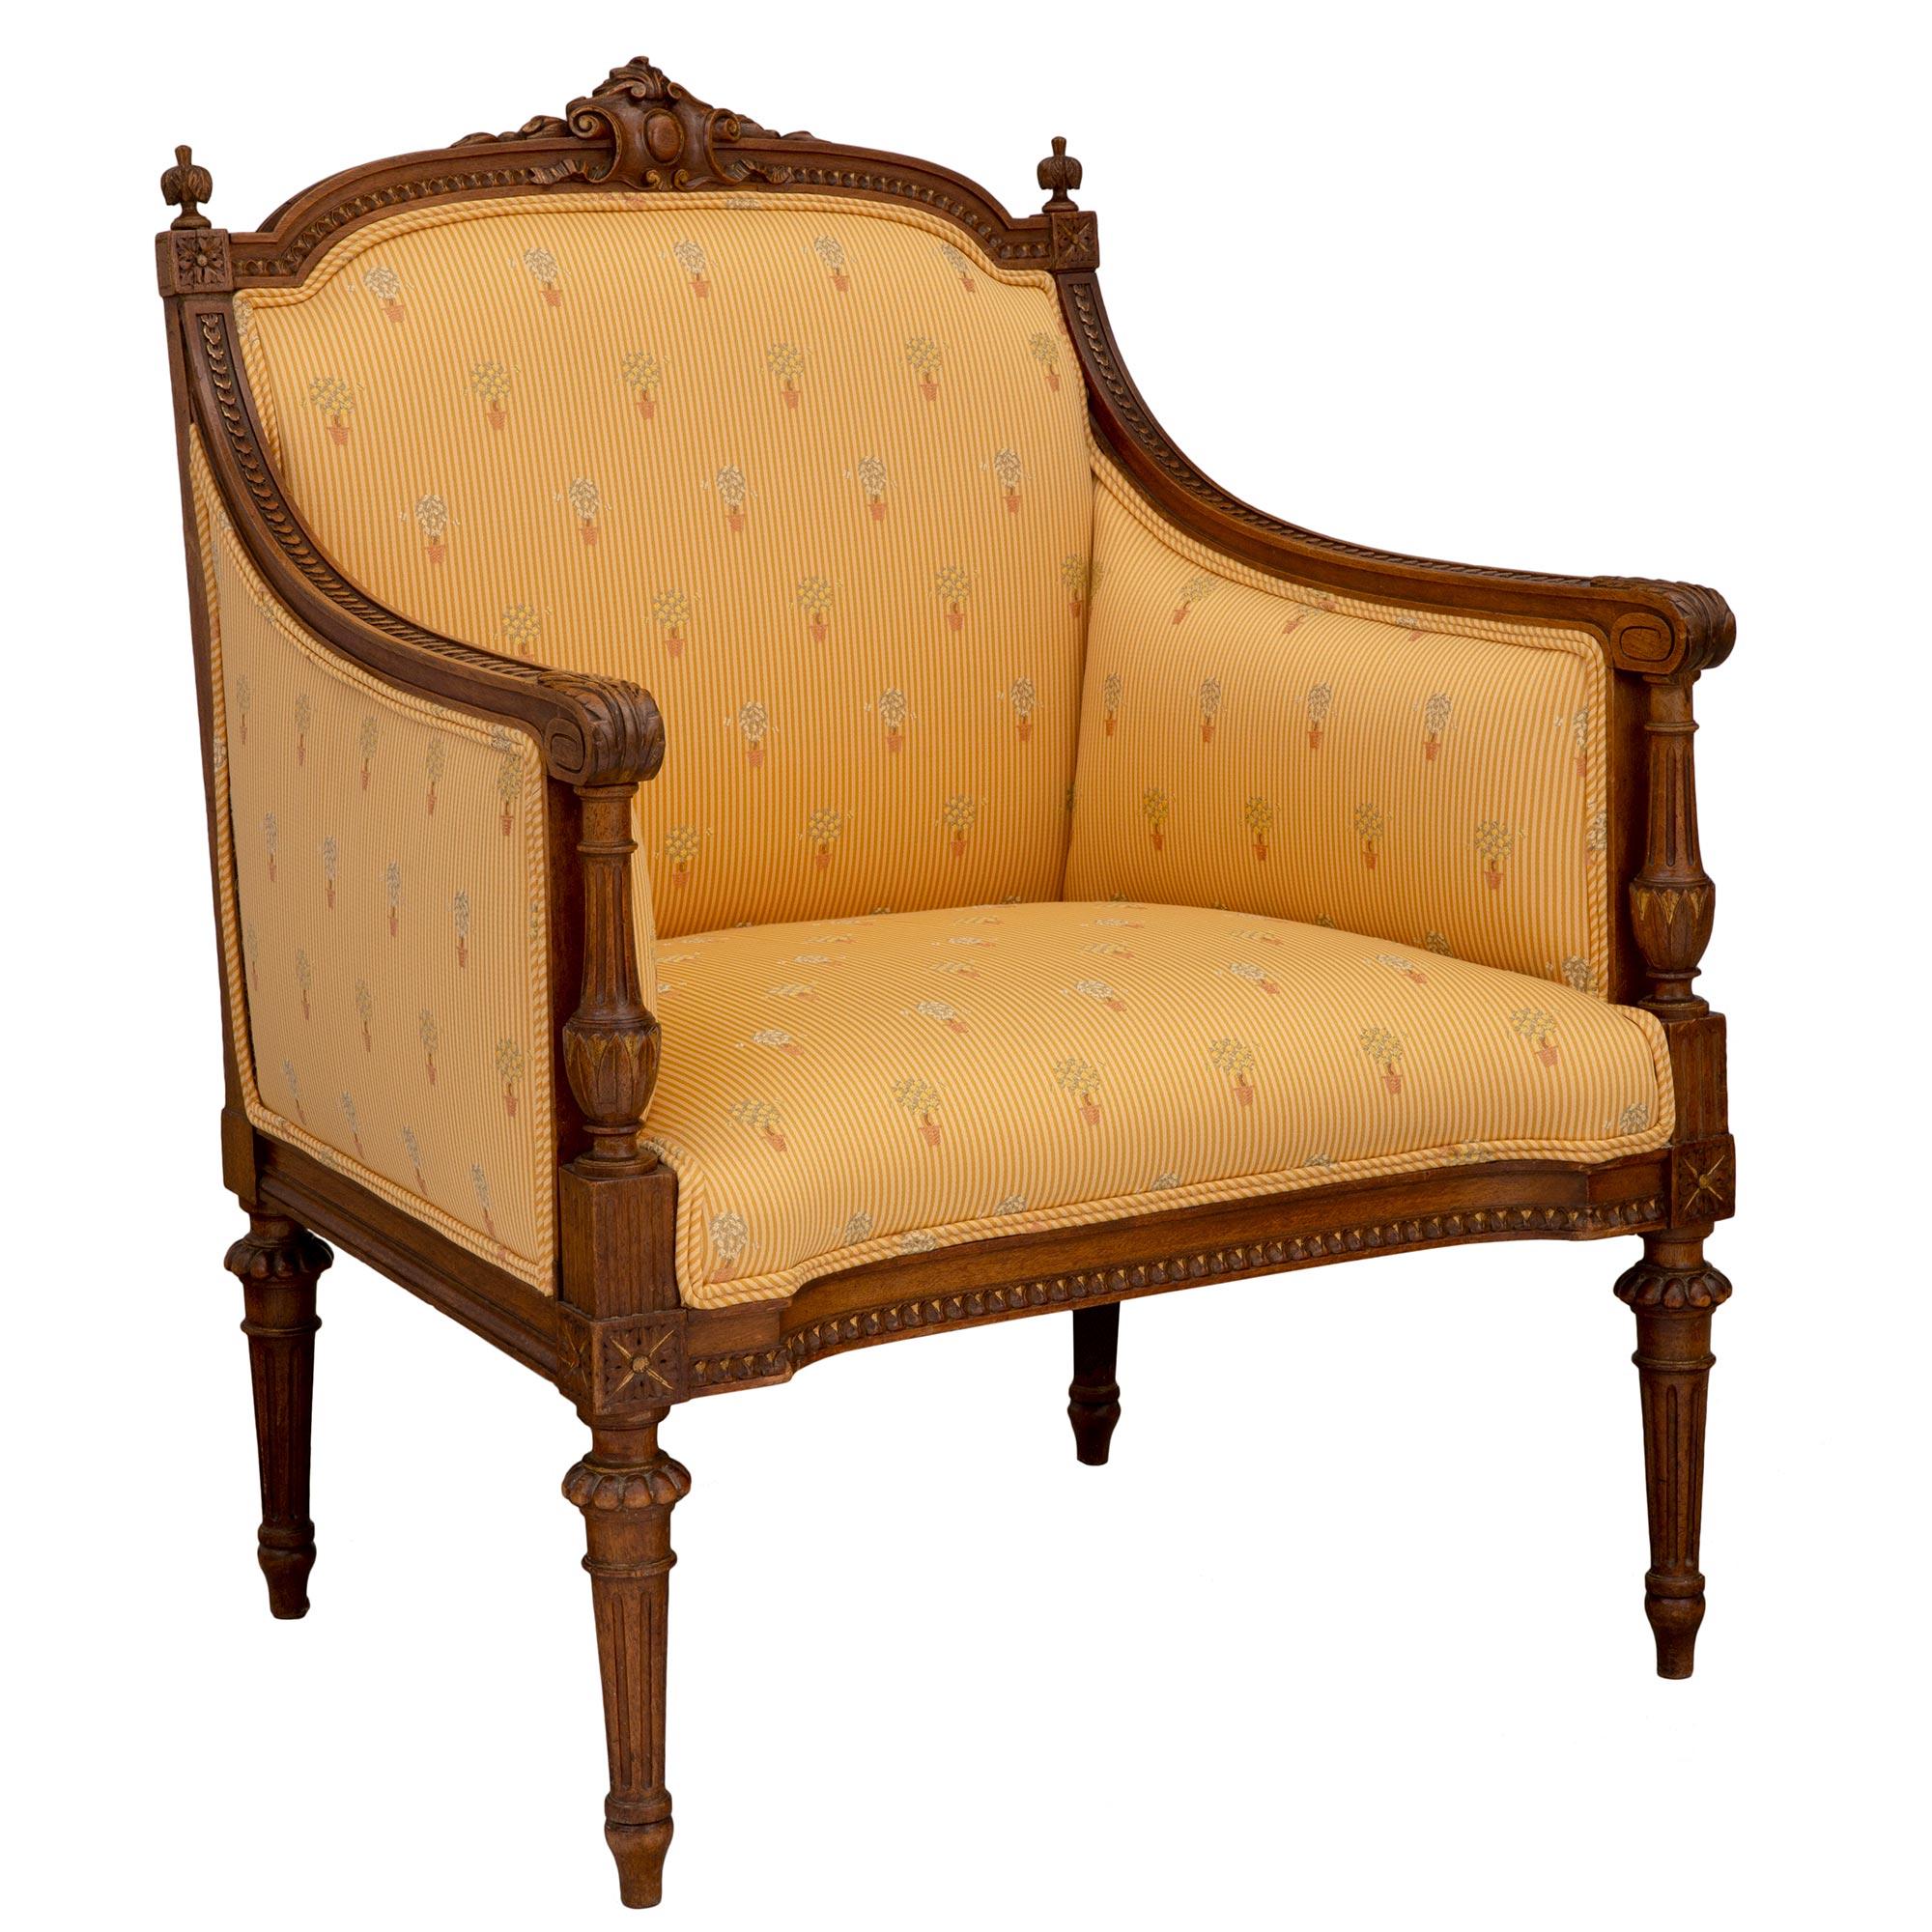 An exquisite French 19th century Louis XVI st. solid oak Marquise armchair. The armchair is raised by elegant circular tapered fluted legs below a fine Coeur de Rai pattern which extends along the apron. Each arm displays most decorative carved